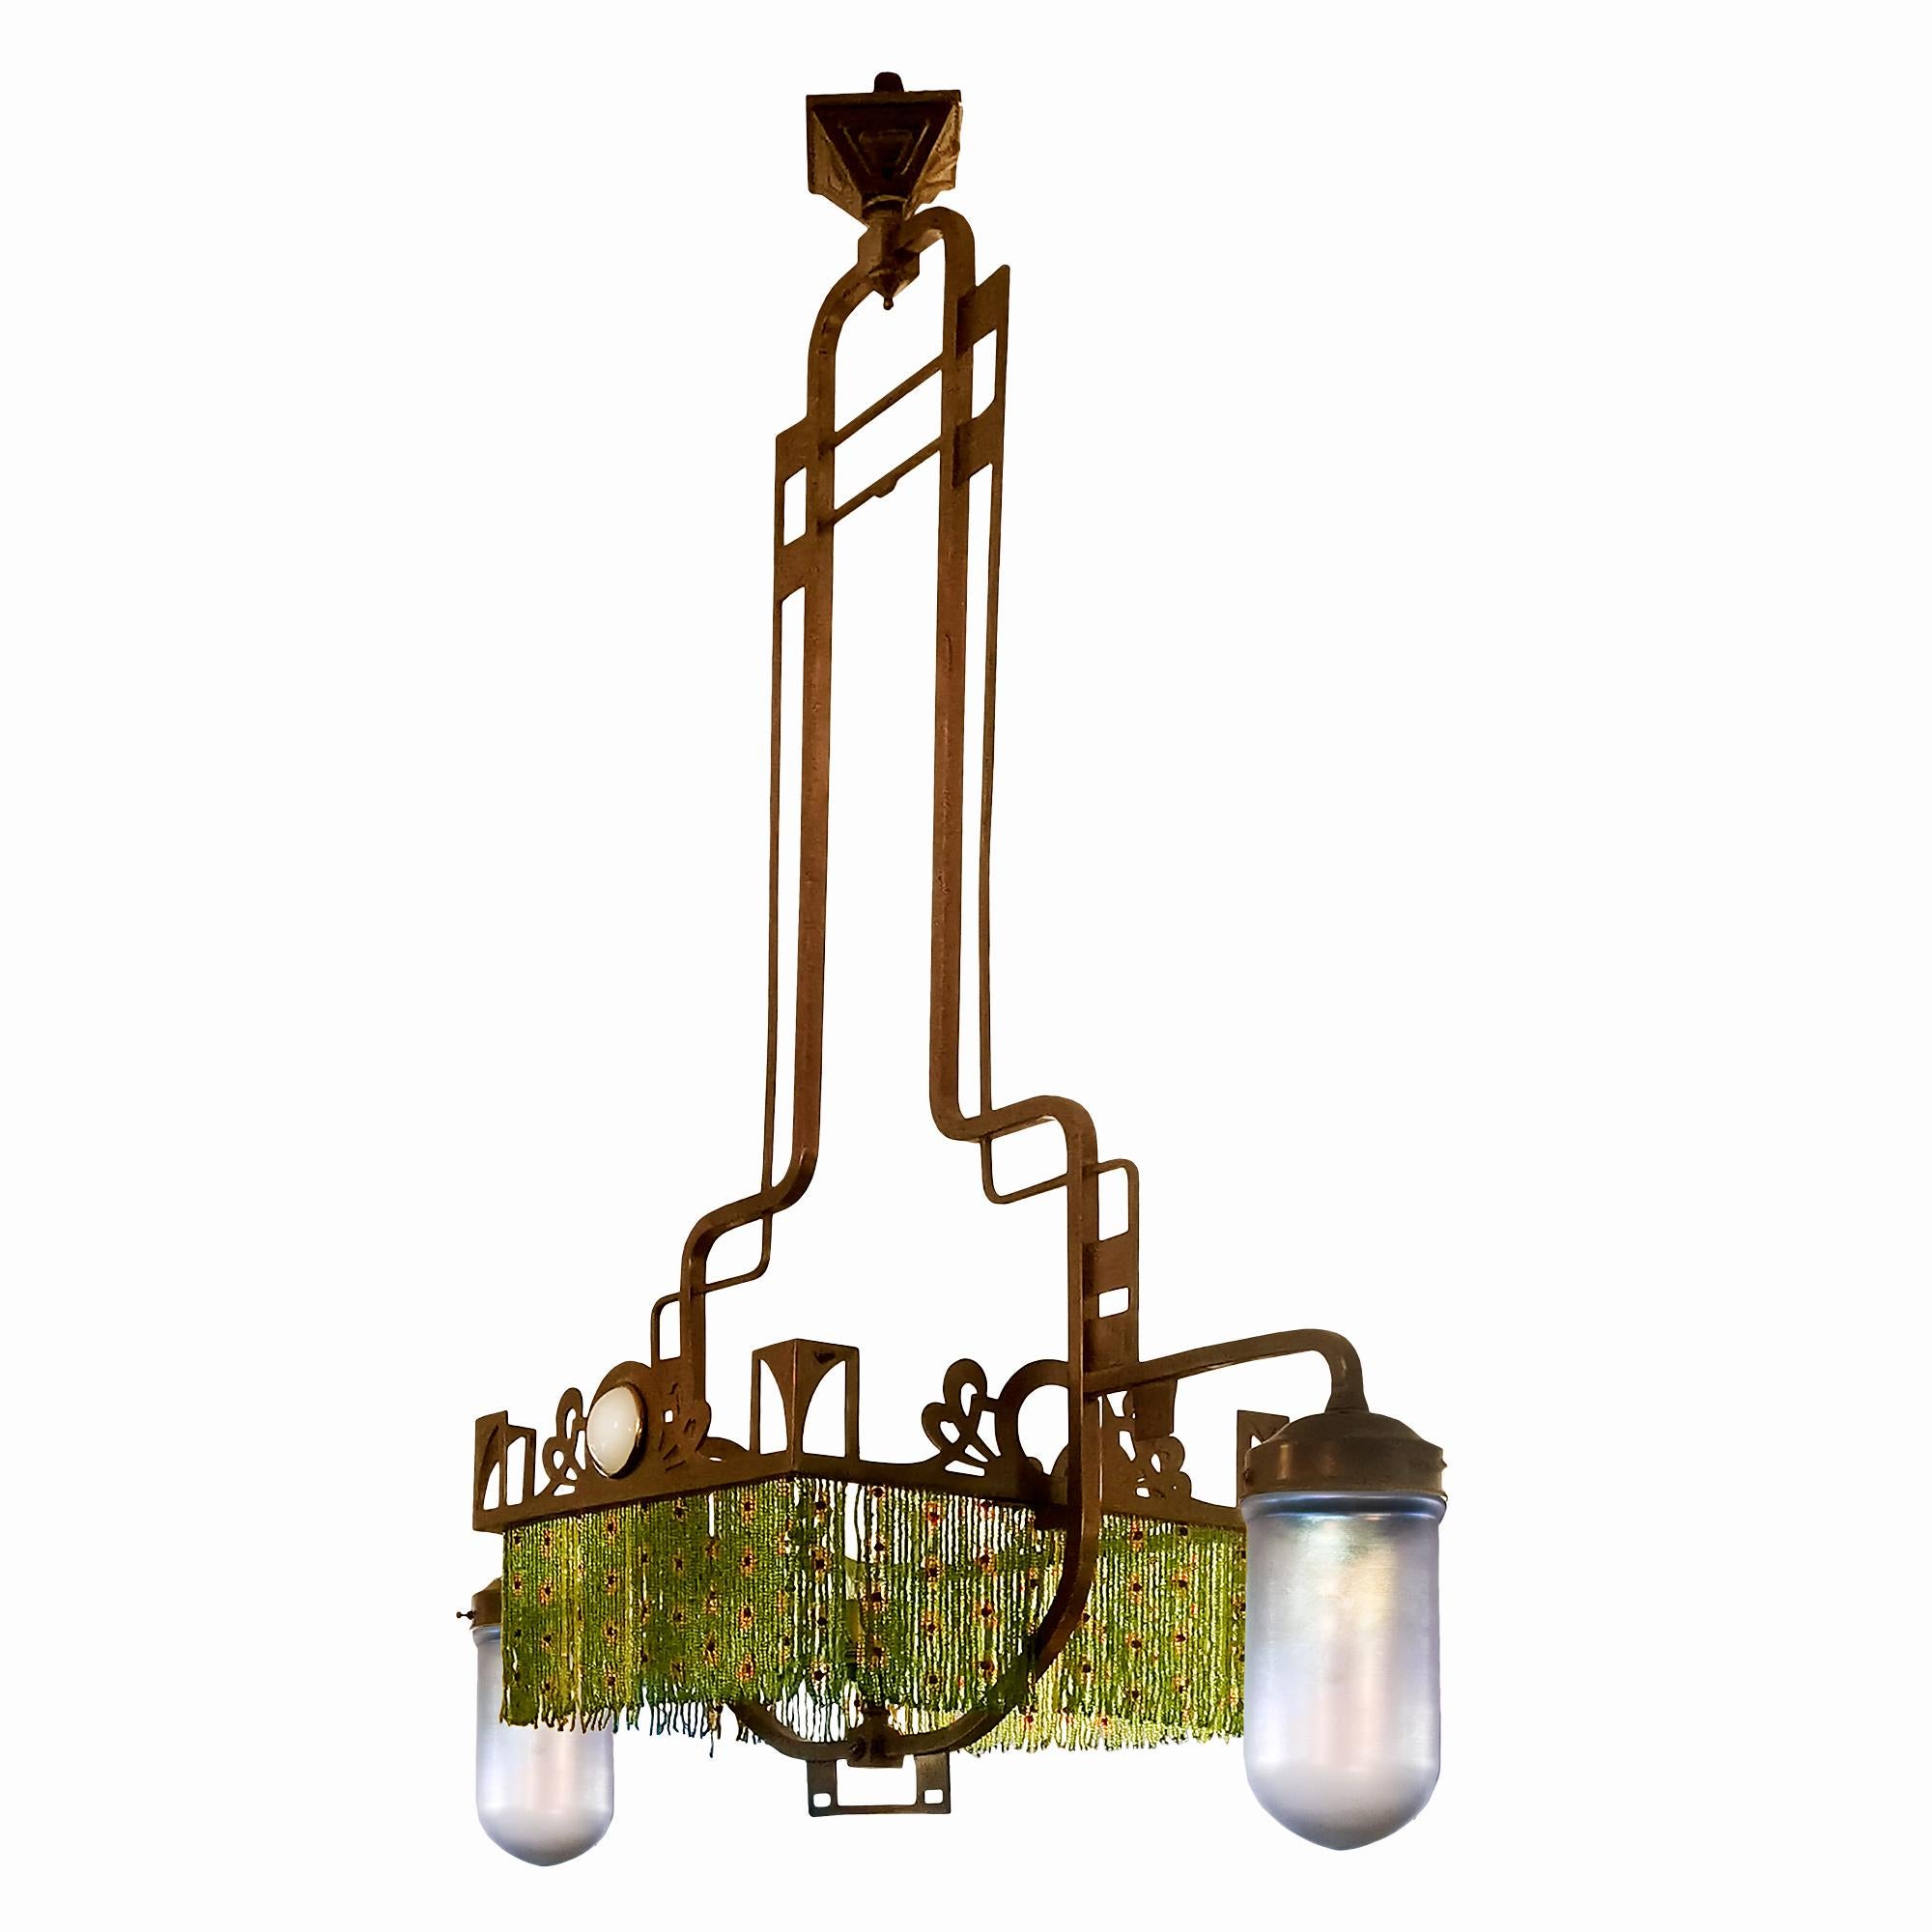 Art Nouveau chandelier in polished brass formerly powered by gas, three points of light, two of which are covered by opalescent glass tulips matching the two thick glass pellets. The row of coloured glass beads hide the third bulb.

Italy, circa